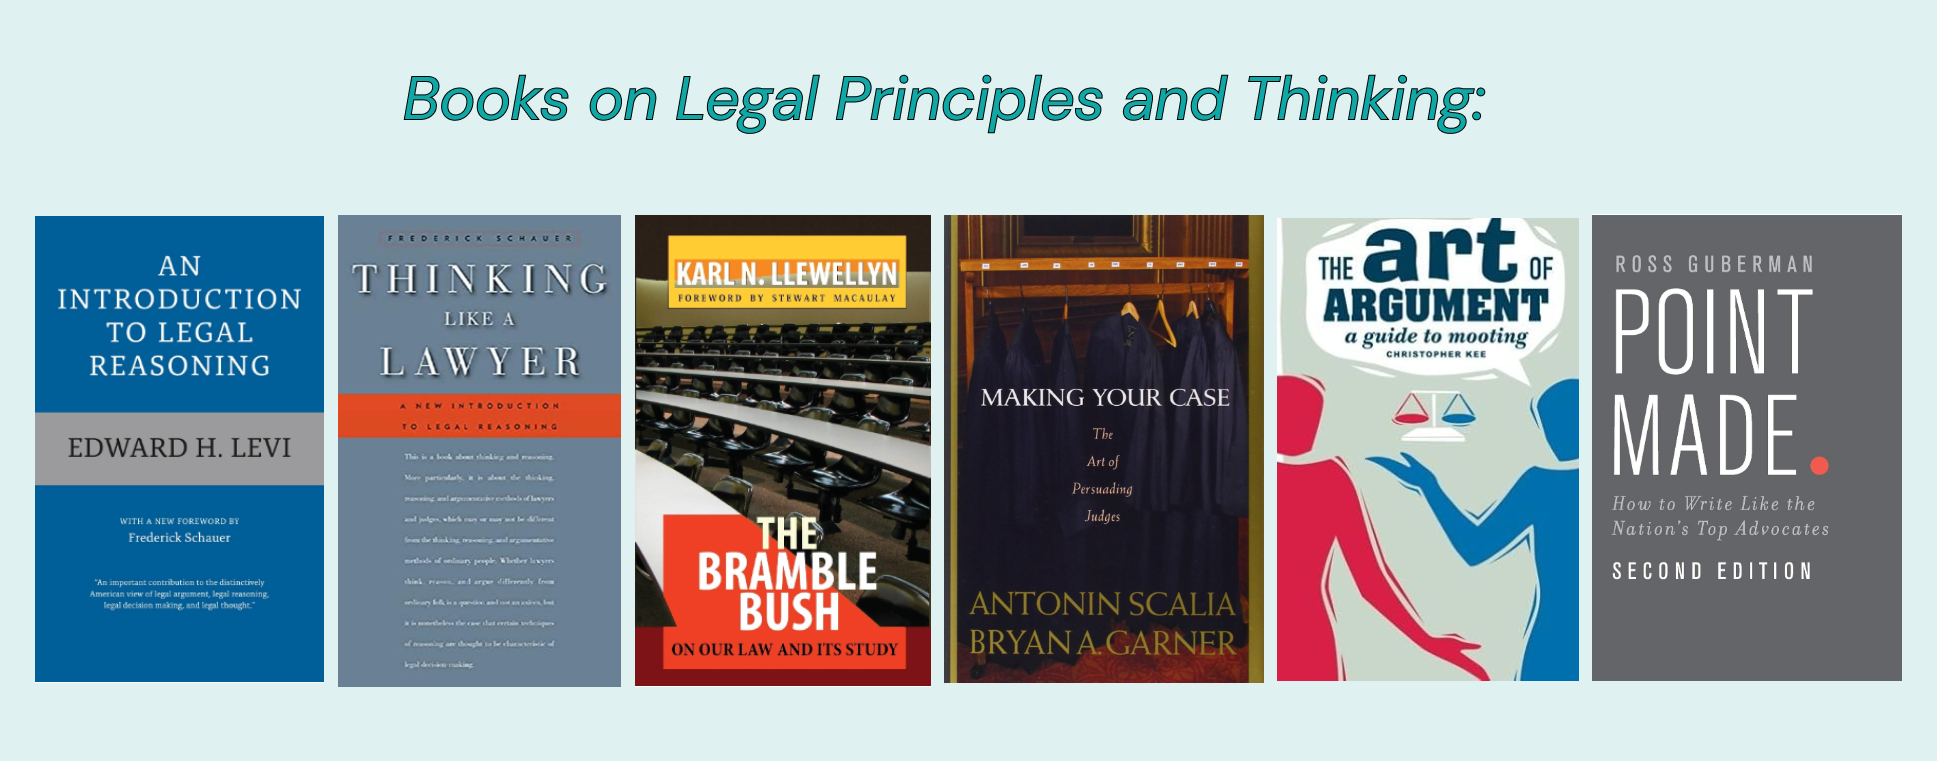 Books on Legal Principles and Thinking